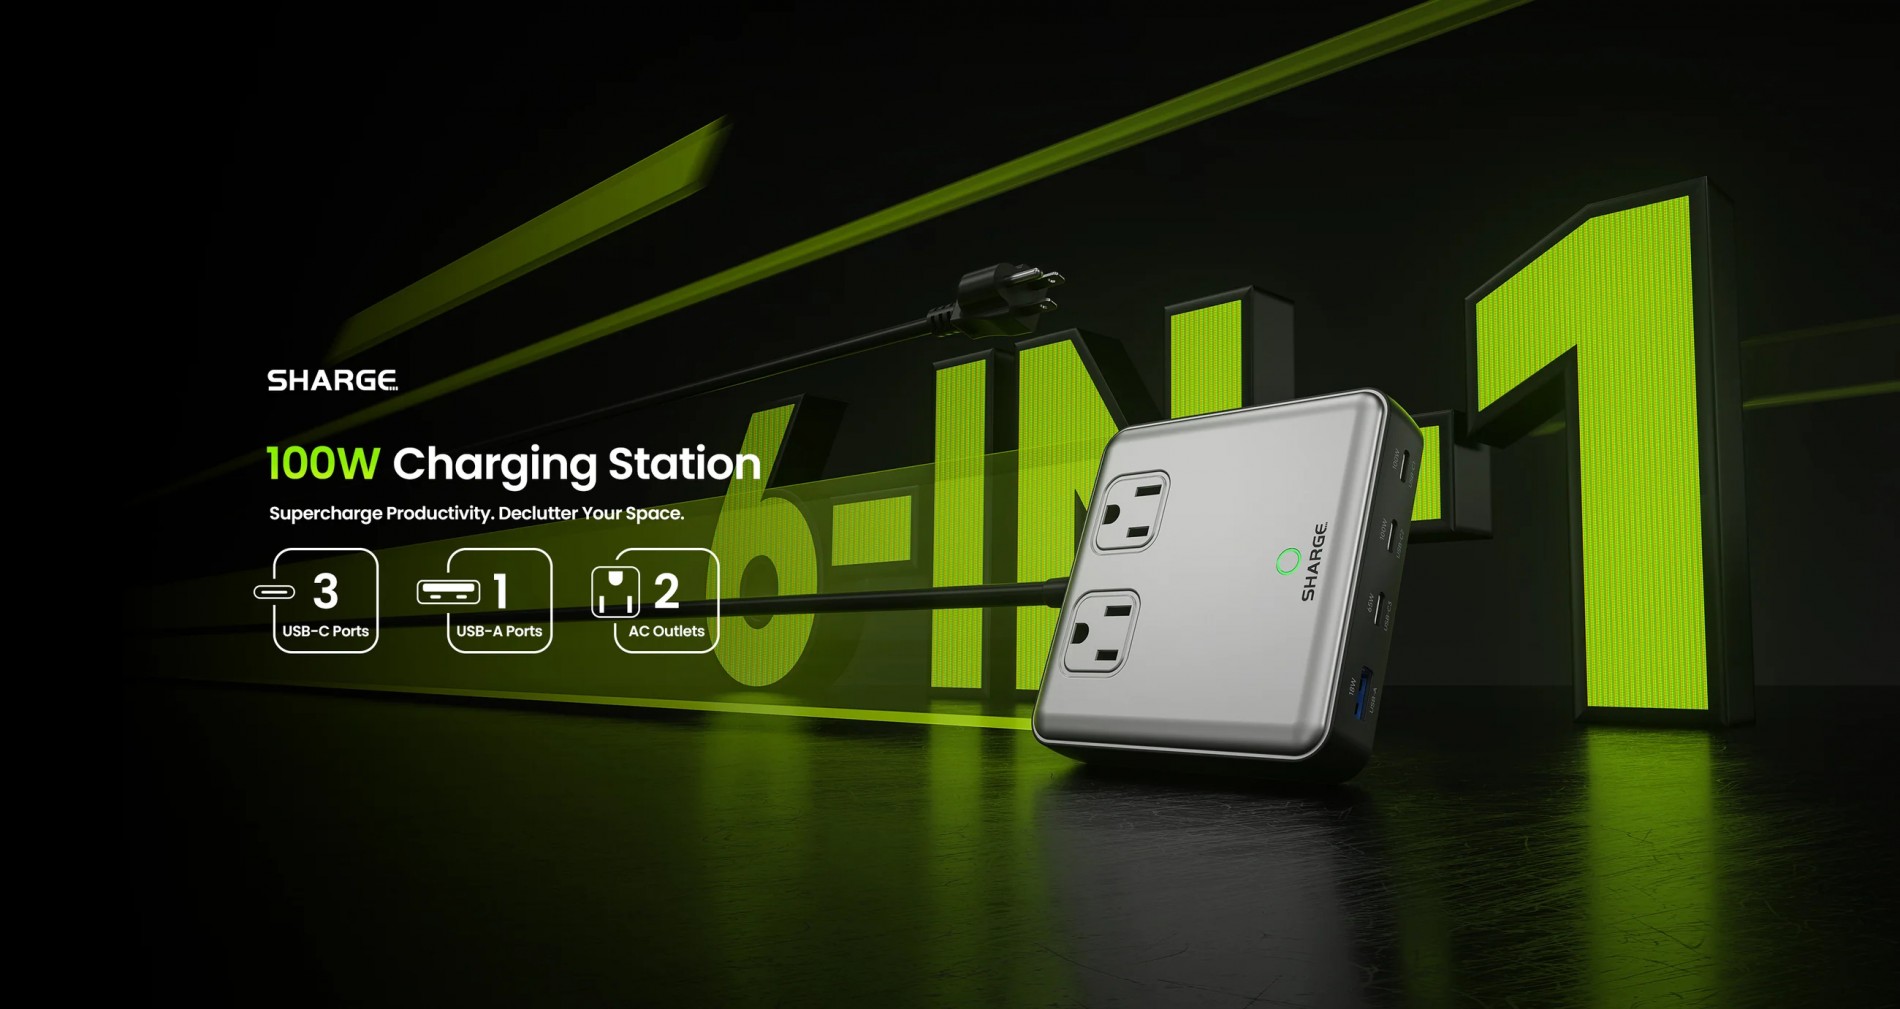 1_sharge_100w_charging_station_6_in_1